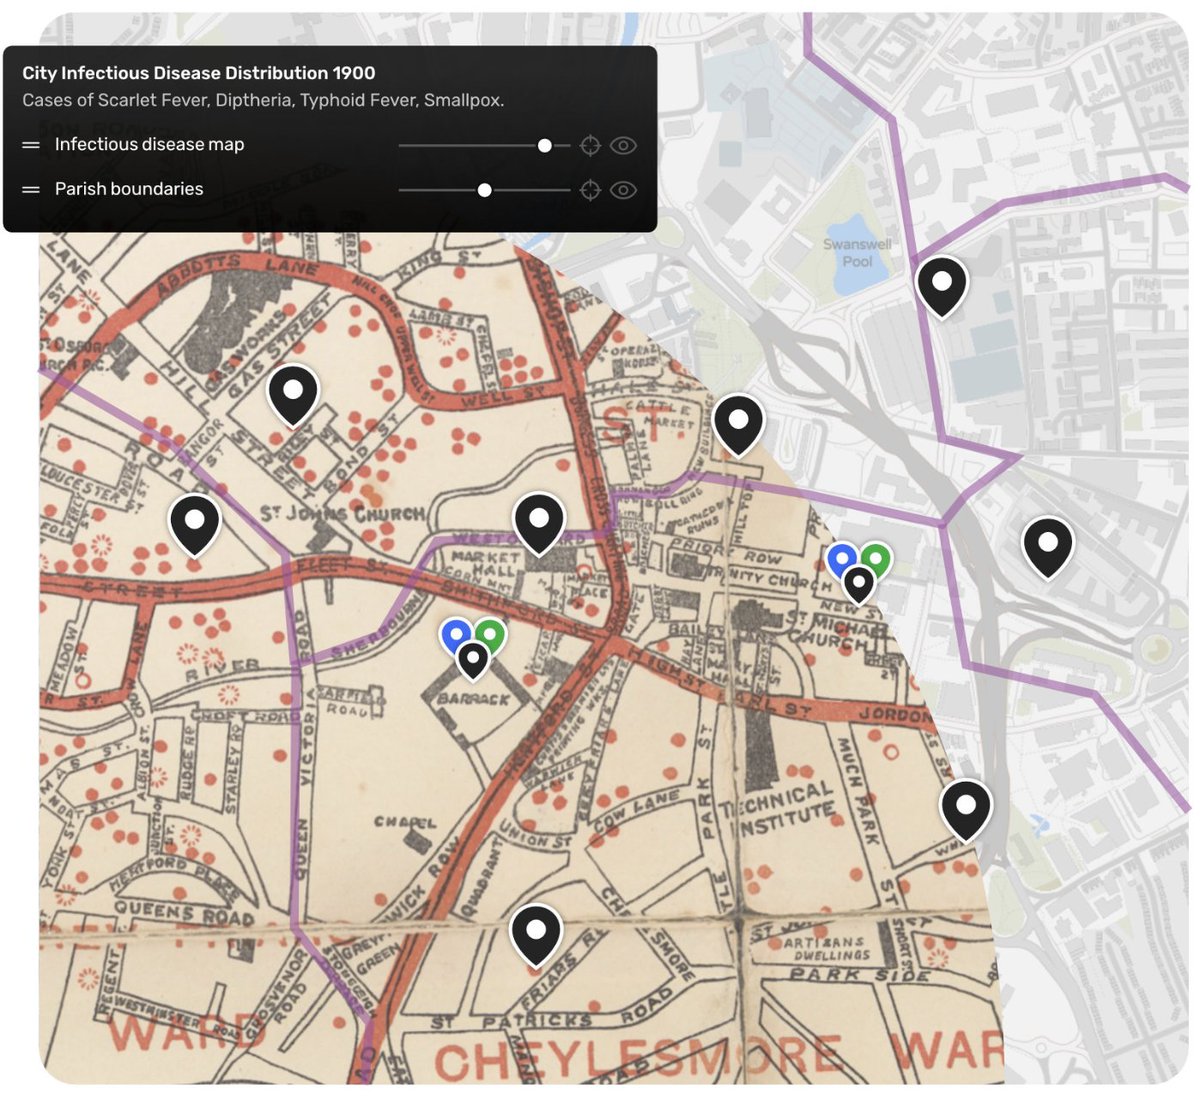 Walkable trails, journeys, timelines, overlays - turn collections into experiences with Humap.

humap.me

 #Maps #InteractiveMaps #DigitalEducation #DigitalHumanities #CulturalHeritage  #GLAM #EducationTechnology #SpatialHumanities #EdTech #StoryMaps